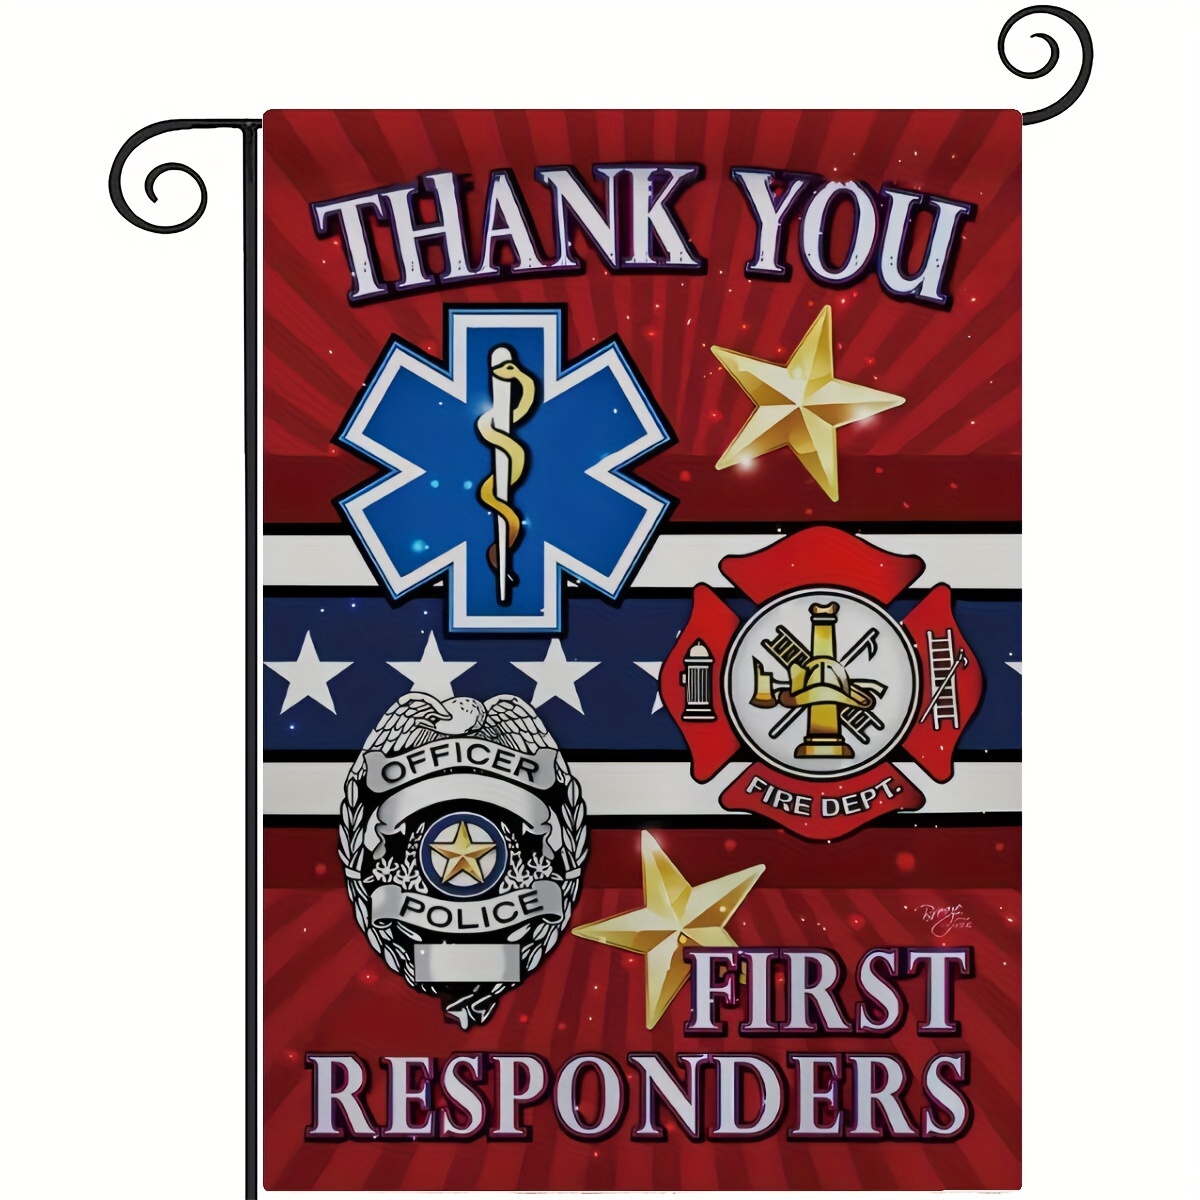 

Thank You First Responders Double-sided Garden Flag - Polyester Patriotic Home & Outdoor Decor For Police, Fire Dept, Nurses - Weather-resistant Yard Banner 11x18in Without Flagpole